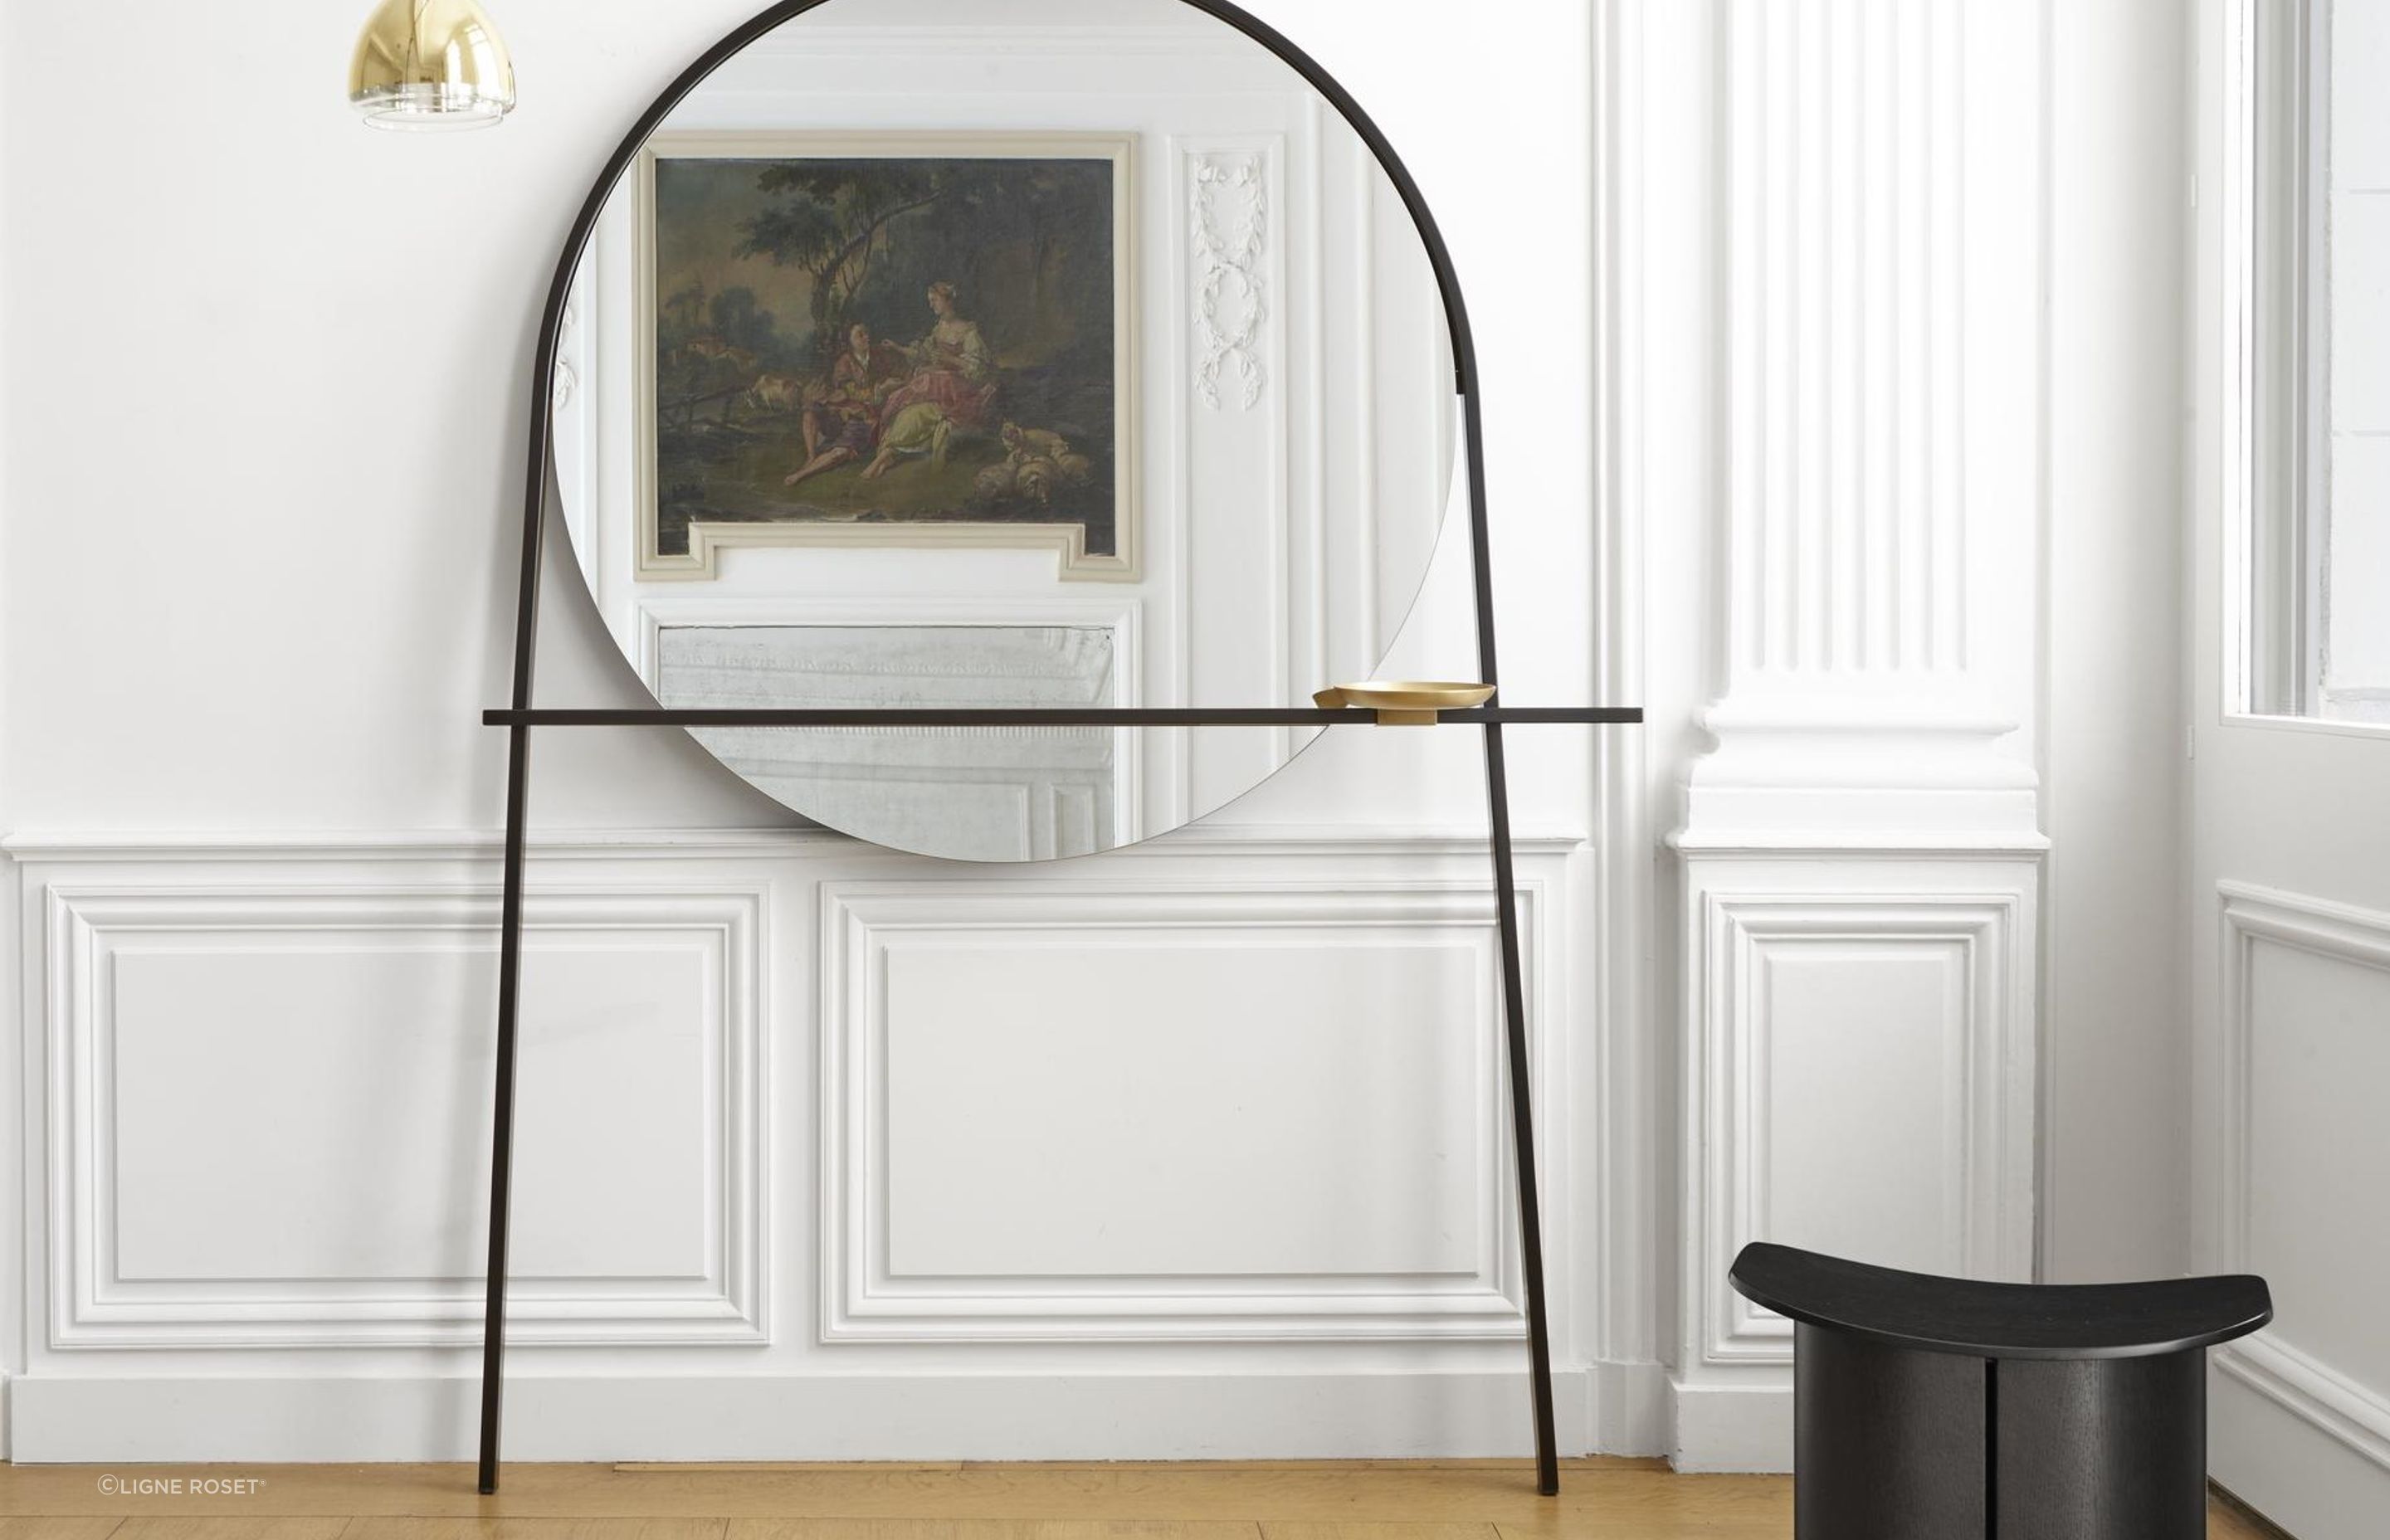 Art on one wall, mirror and art on the other, executed with style here using the Geoffrey Mirror Clothes Stand by Alian Gilles.